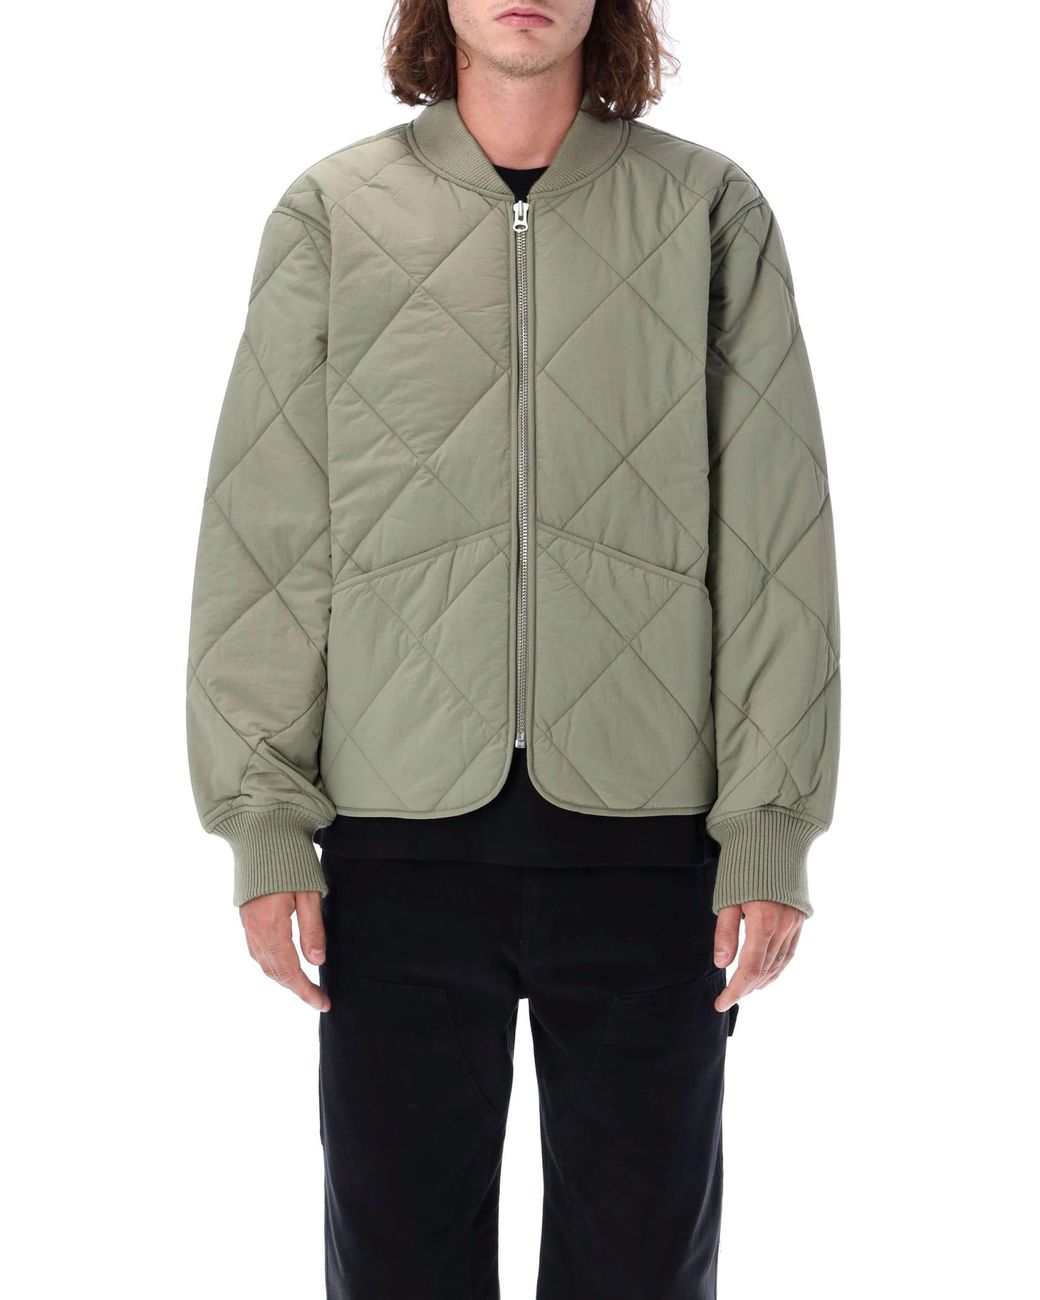 STUSSY DICE QUILTED LINER JACKET